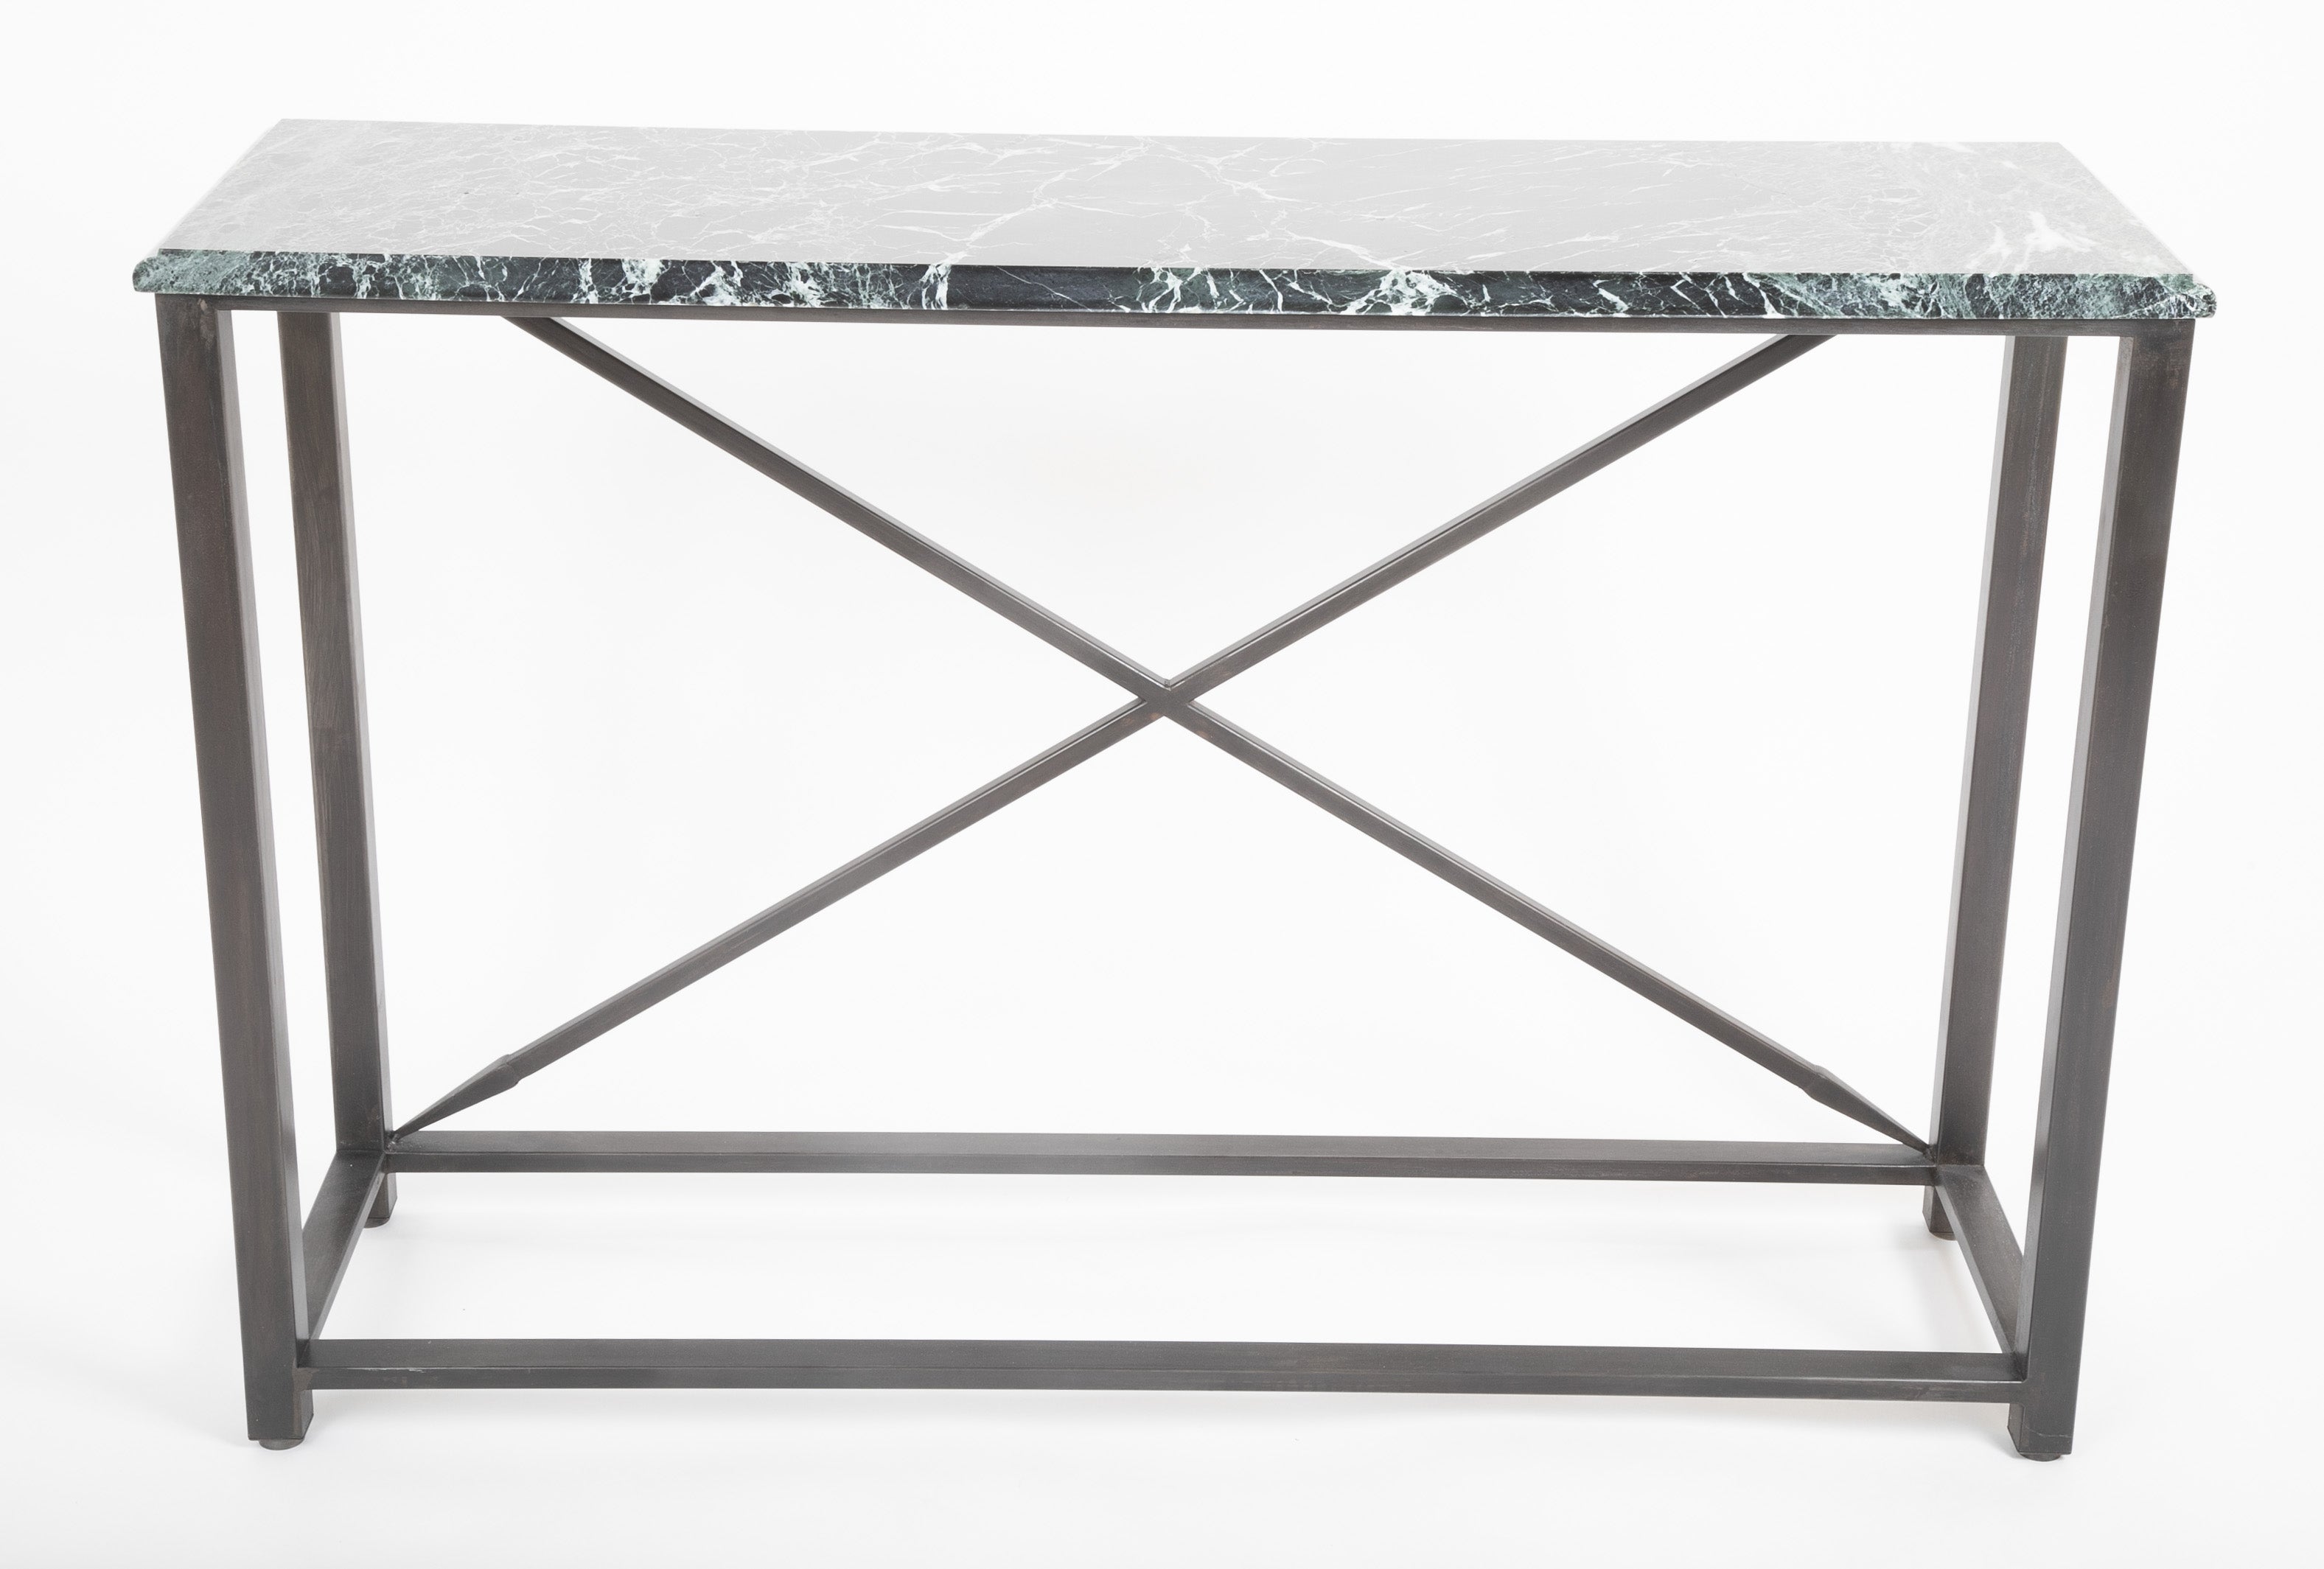 Pair of Neo-Classical Style Steel Console Tables with Marble Tops